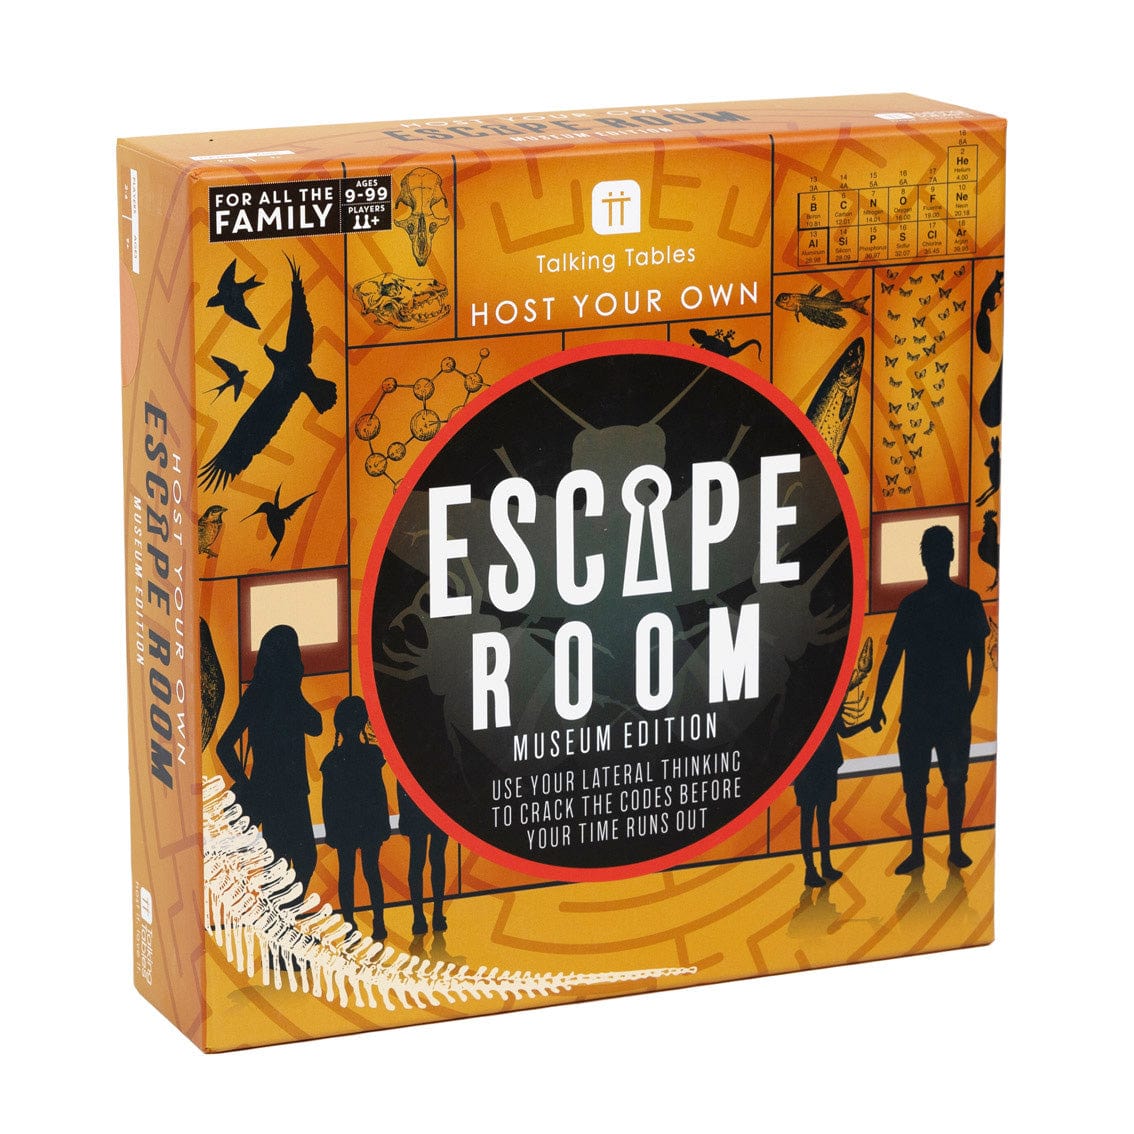 Talking Tables Host Your Own Family Escape Room - Museum Edition